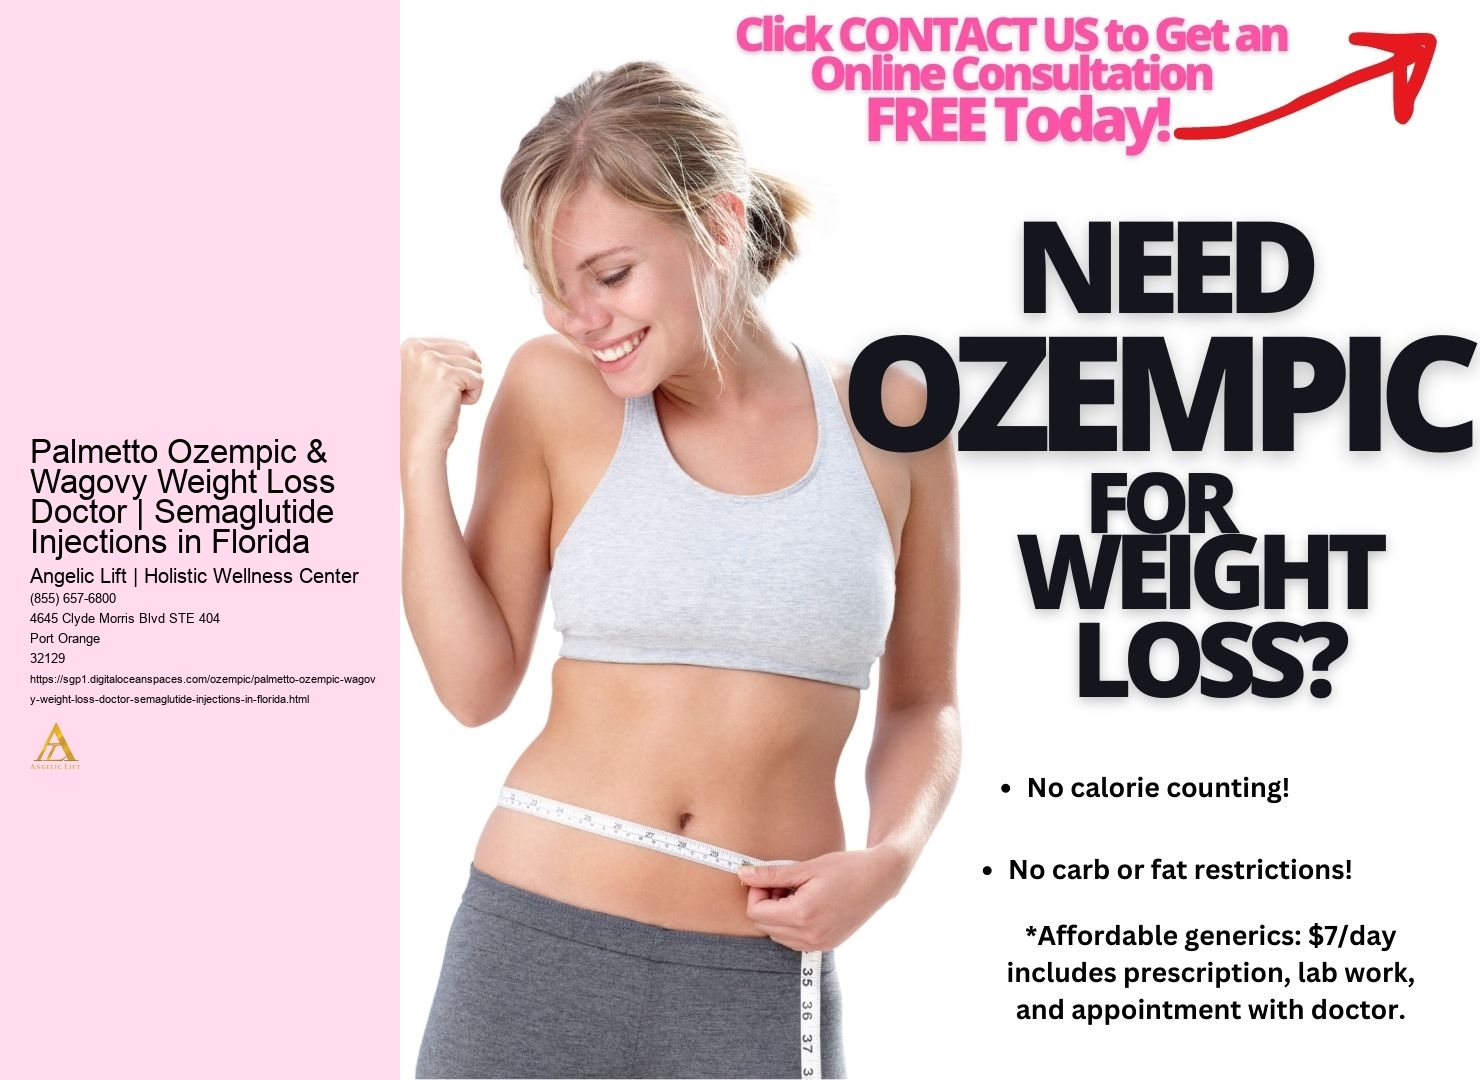 Palmetto Ozempic & Wagovy Weight Loss Doctor | Semaglutide Injections in Florida